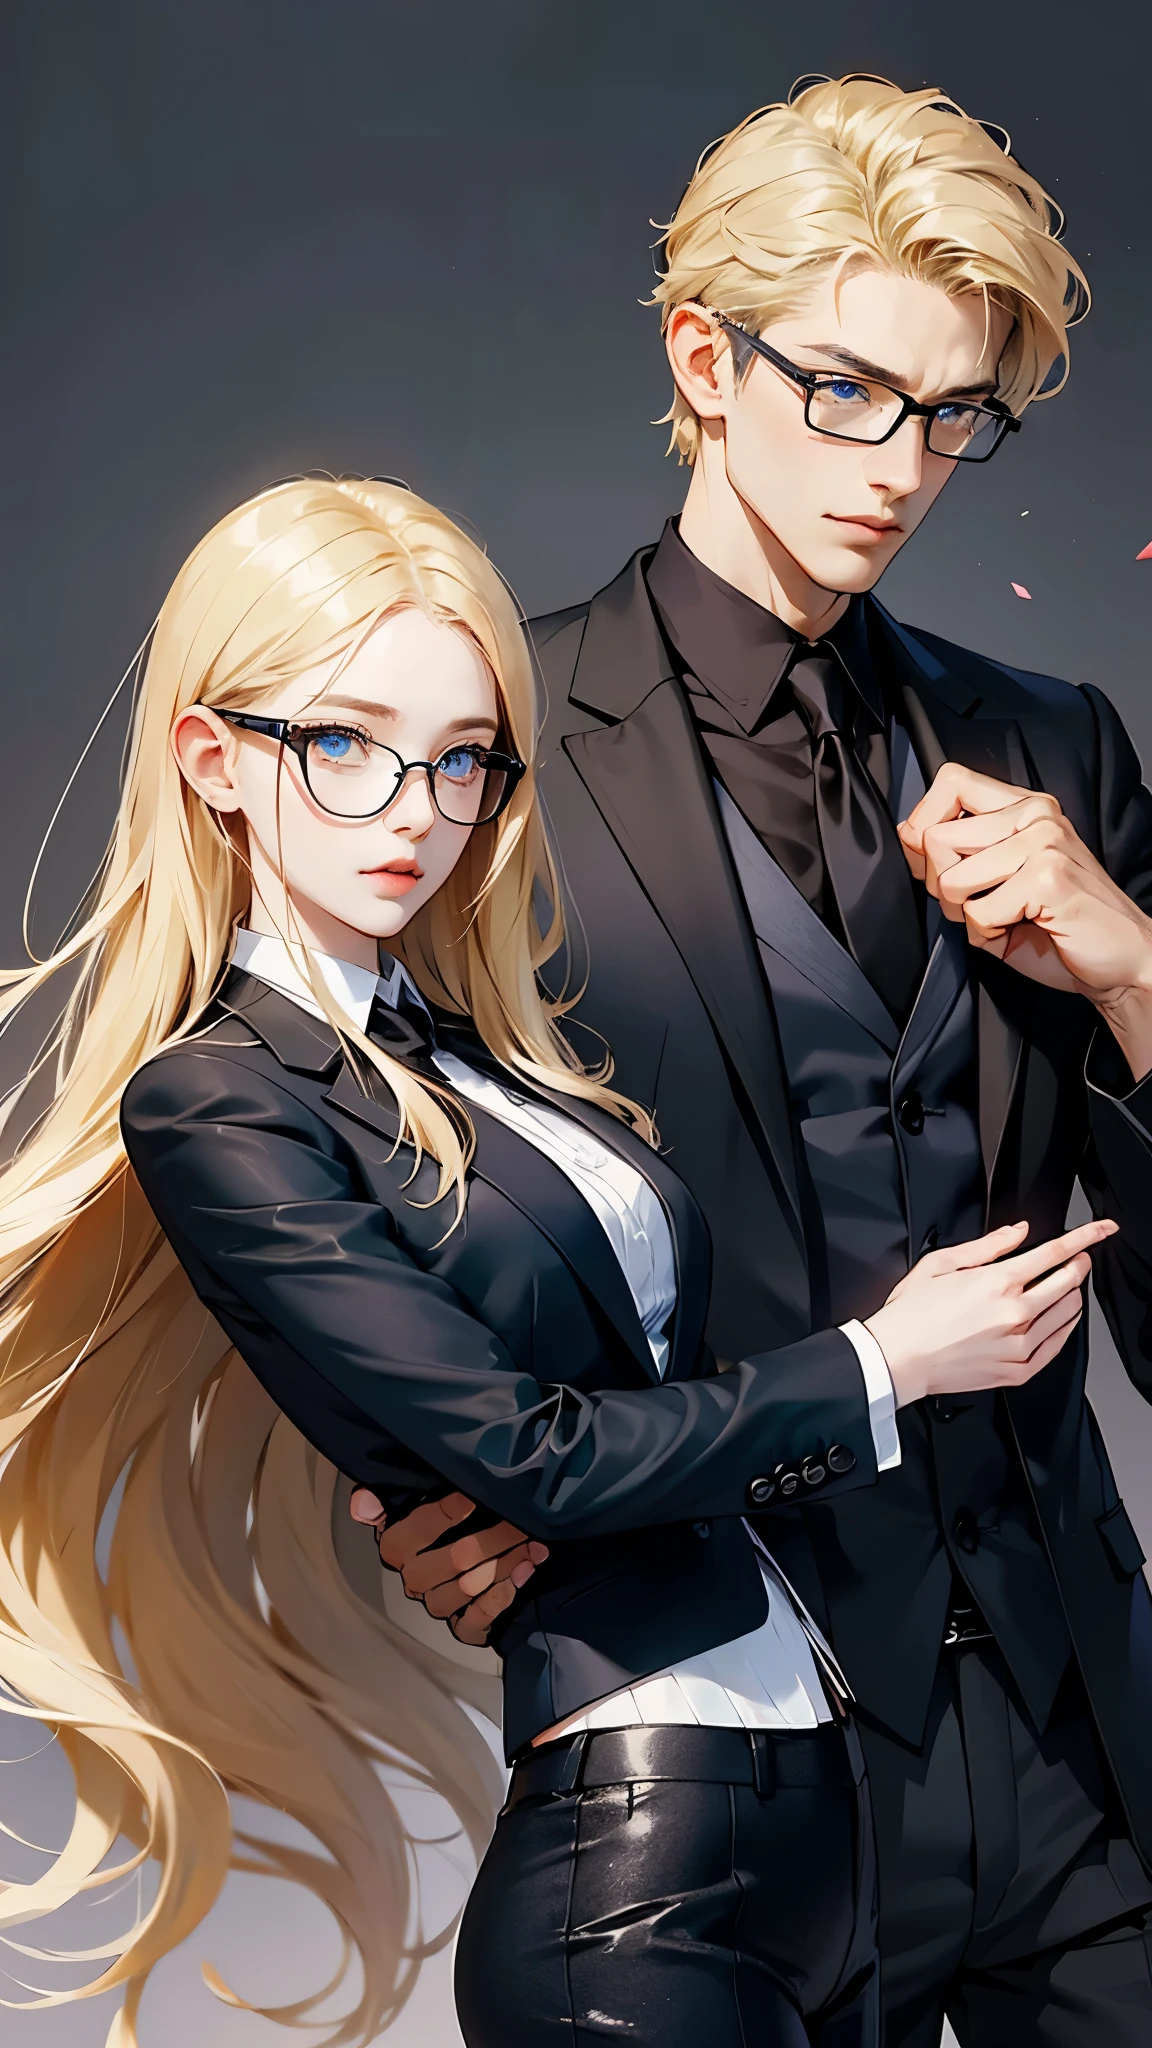 With anime style illustrations、A young man and woman couple appears。The man has blue eyes、Wearing a black suit jacket。The woman is blonde and wears glasses.、She&#39;s wearing soft pink clothes。The two of them pose intimately、The background has vibrant blue and pink tones that evoke a romantic atmosphere.。A woman grabs a man&#39;s jacket、It emphasizes the intimacy between the two。They&#39;re both in the same position、sit side by side。